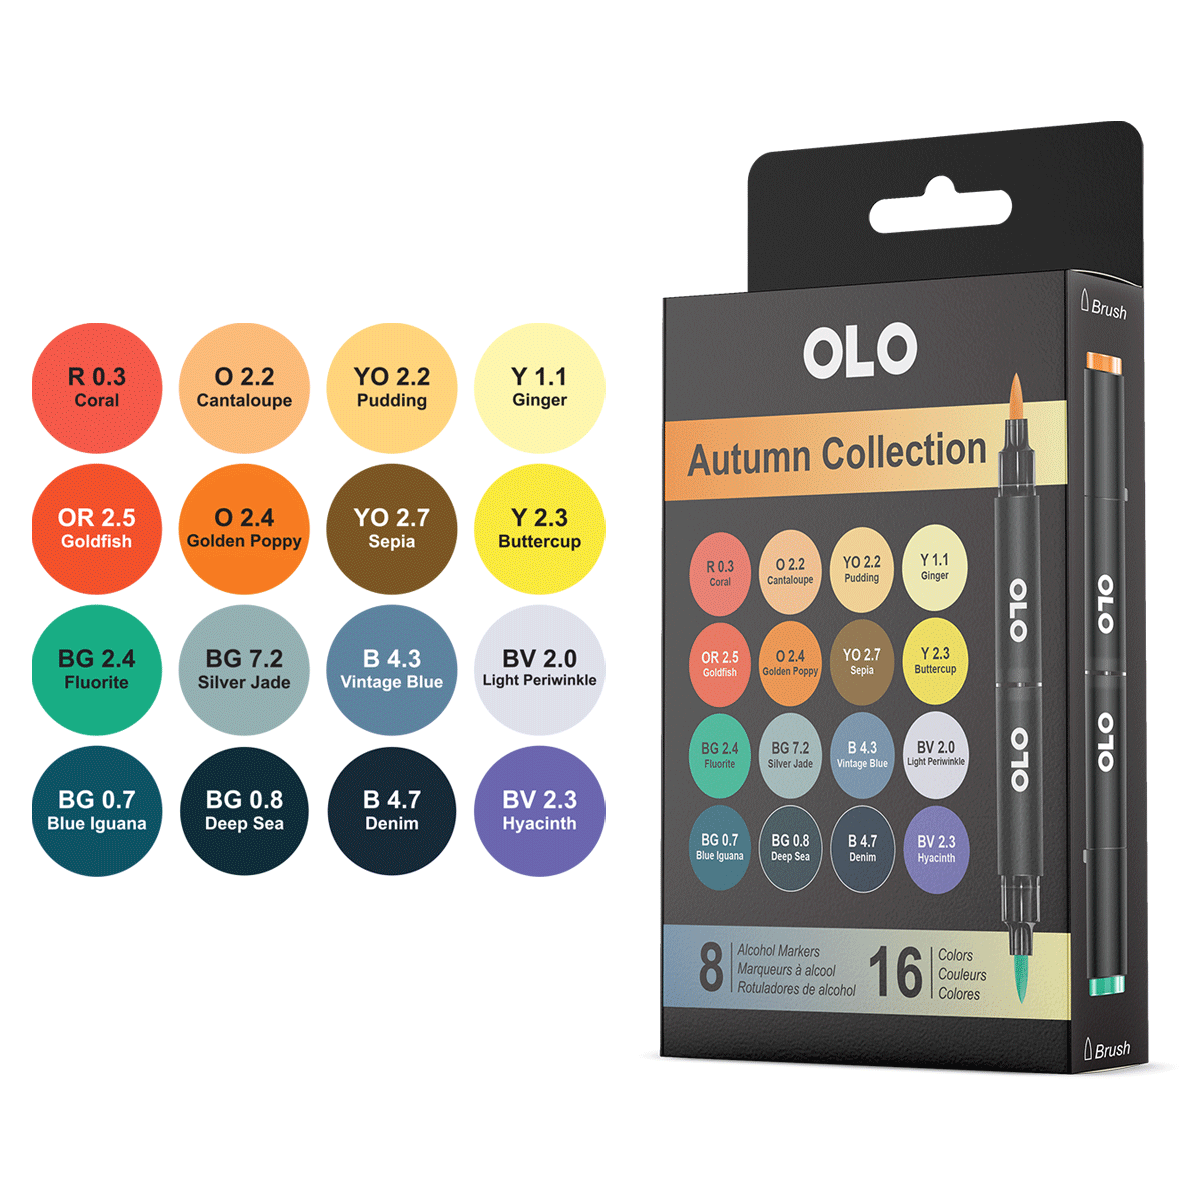 Autumn Collection: OLO Markers - Picket Fence Studios